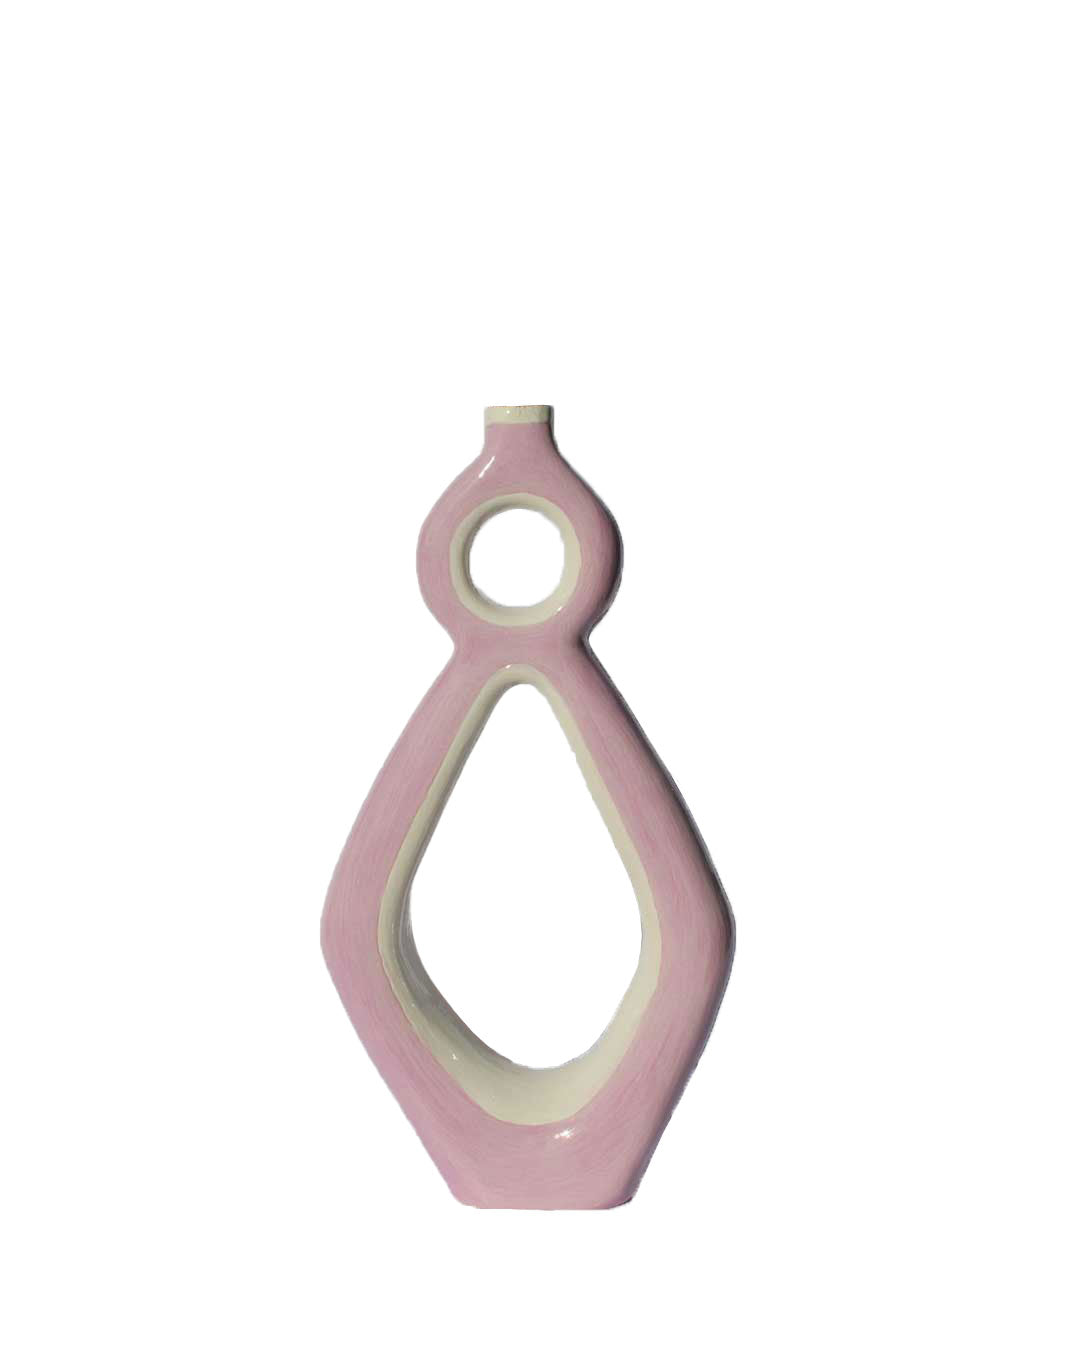 Minimalist Vase with pink color